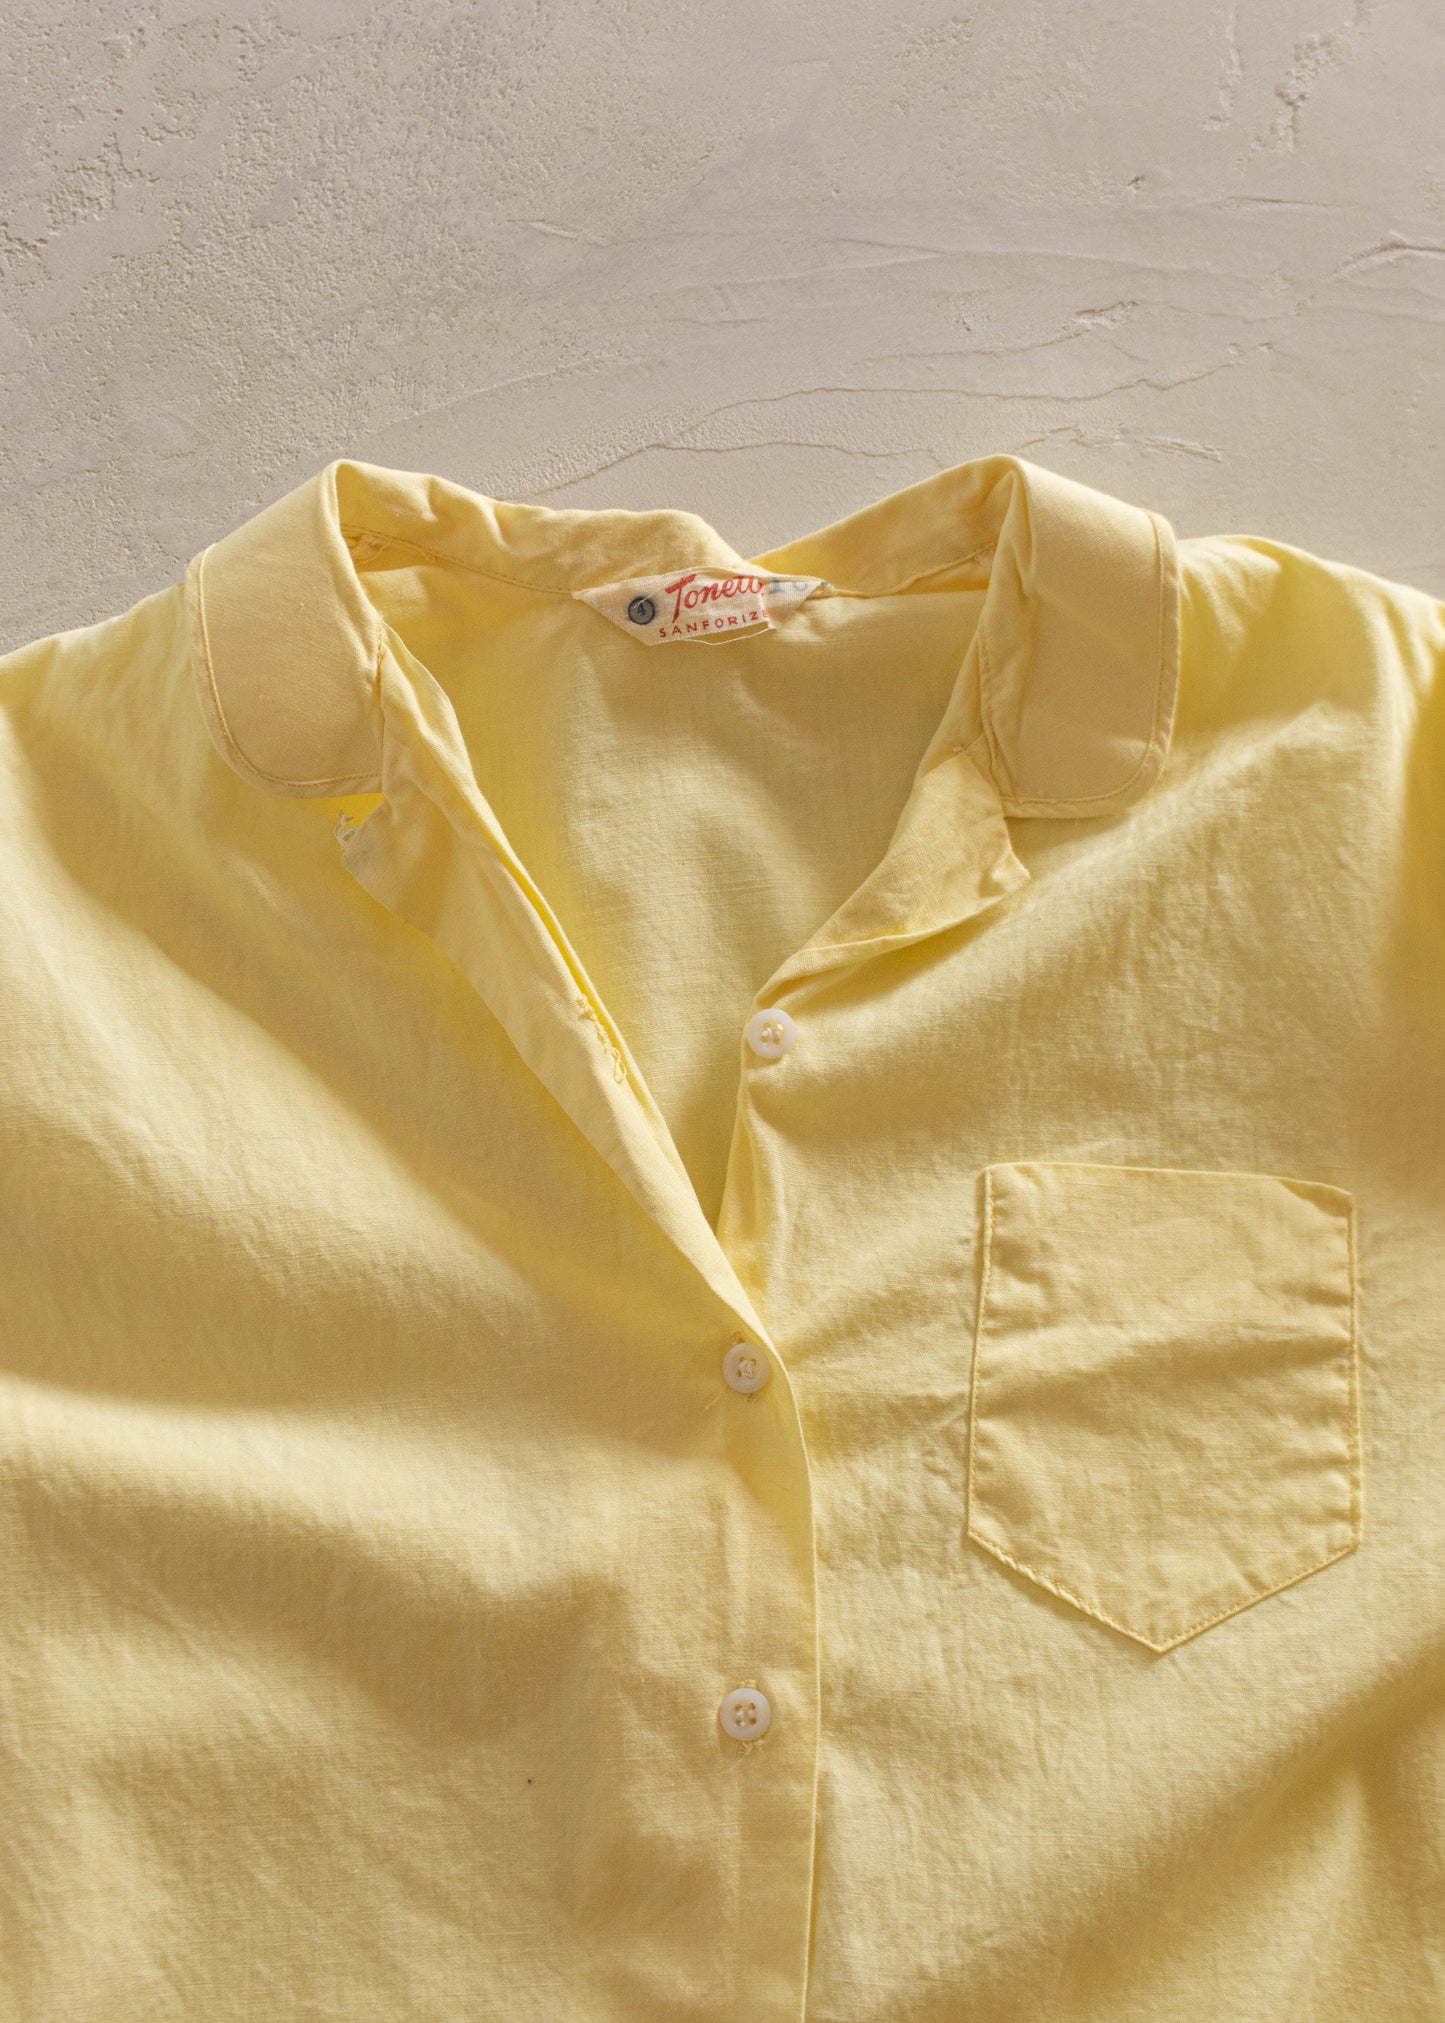 1960s Tonette Solid Yellow Long Sleeve Button Up Pajama Shirt Size XS/S